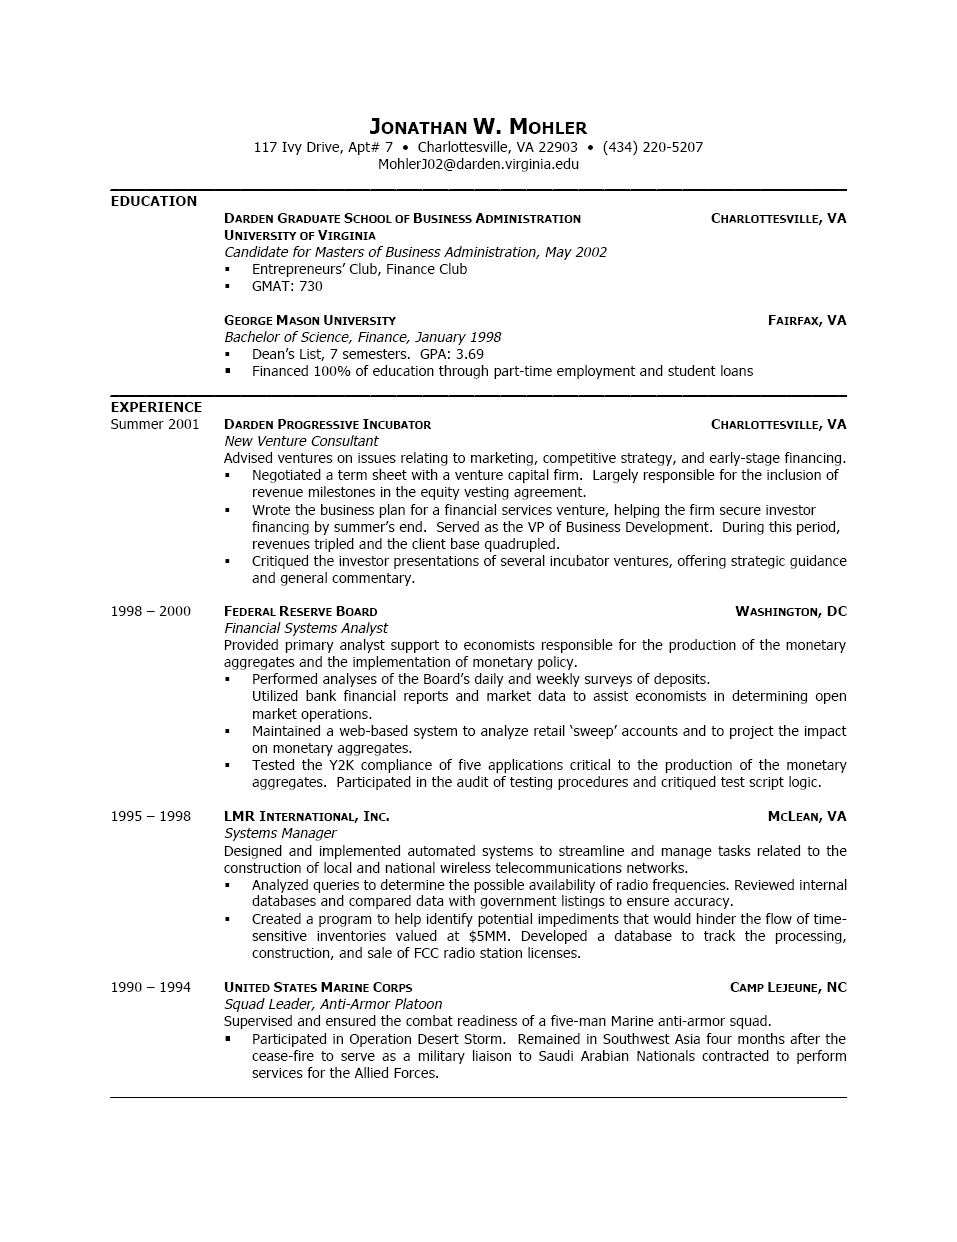 Roustabout resume template